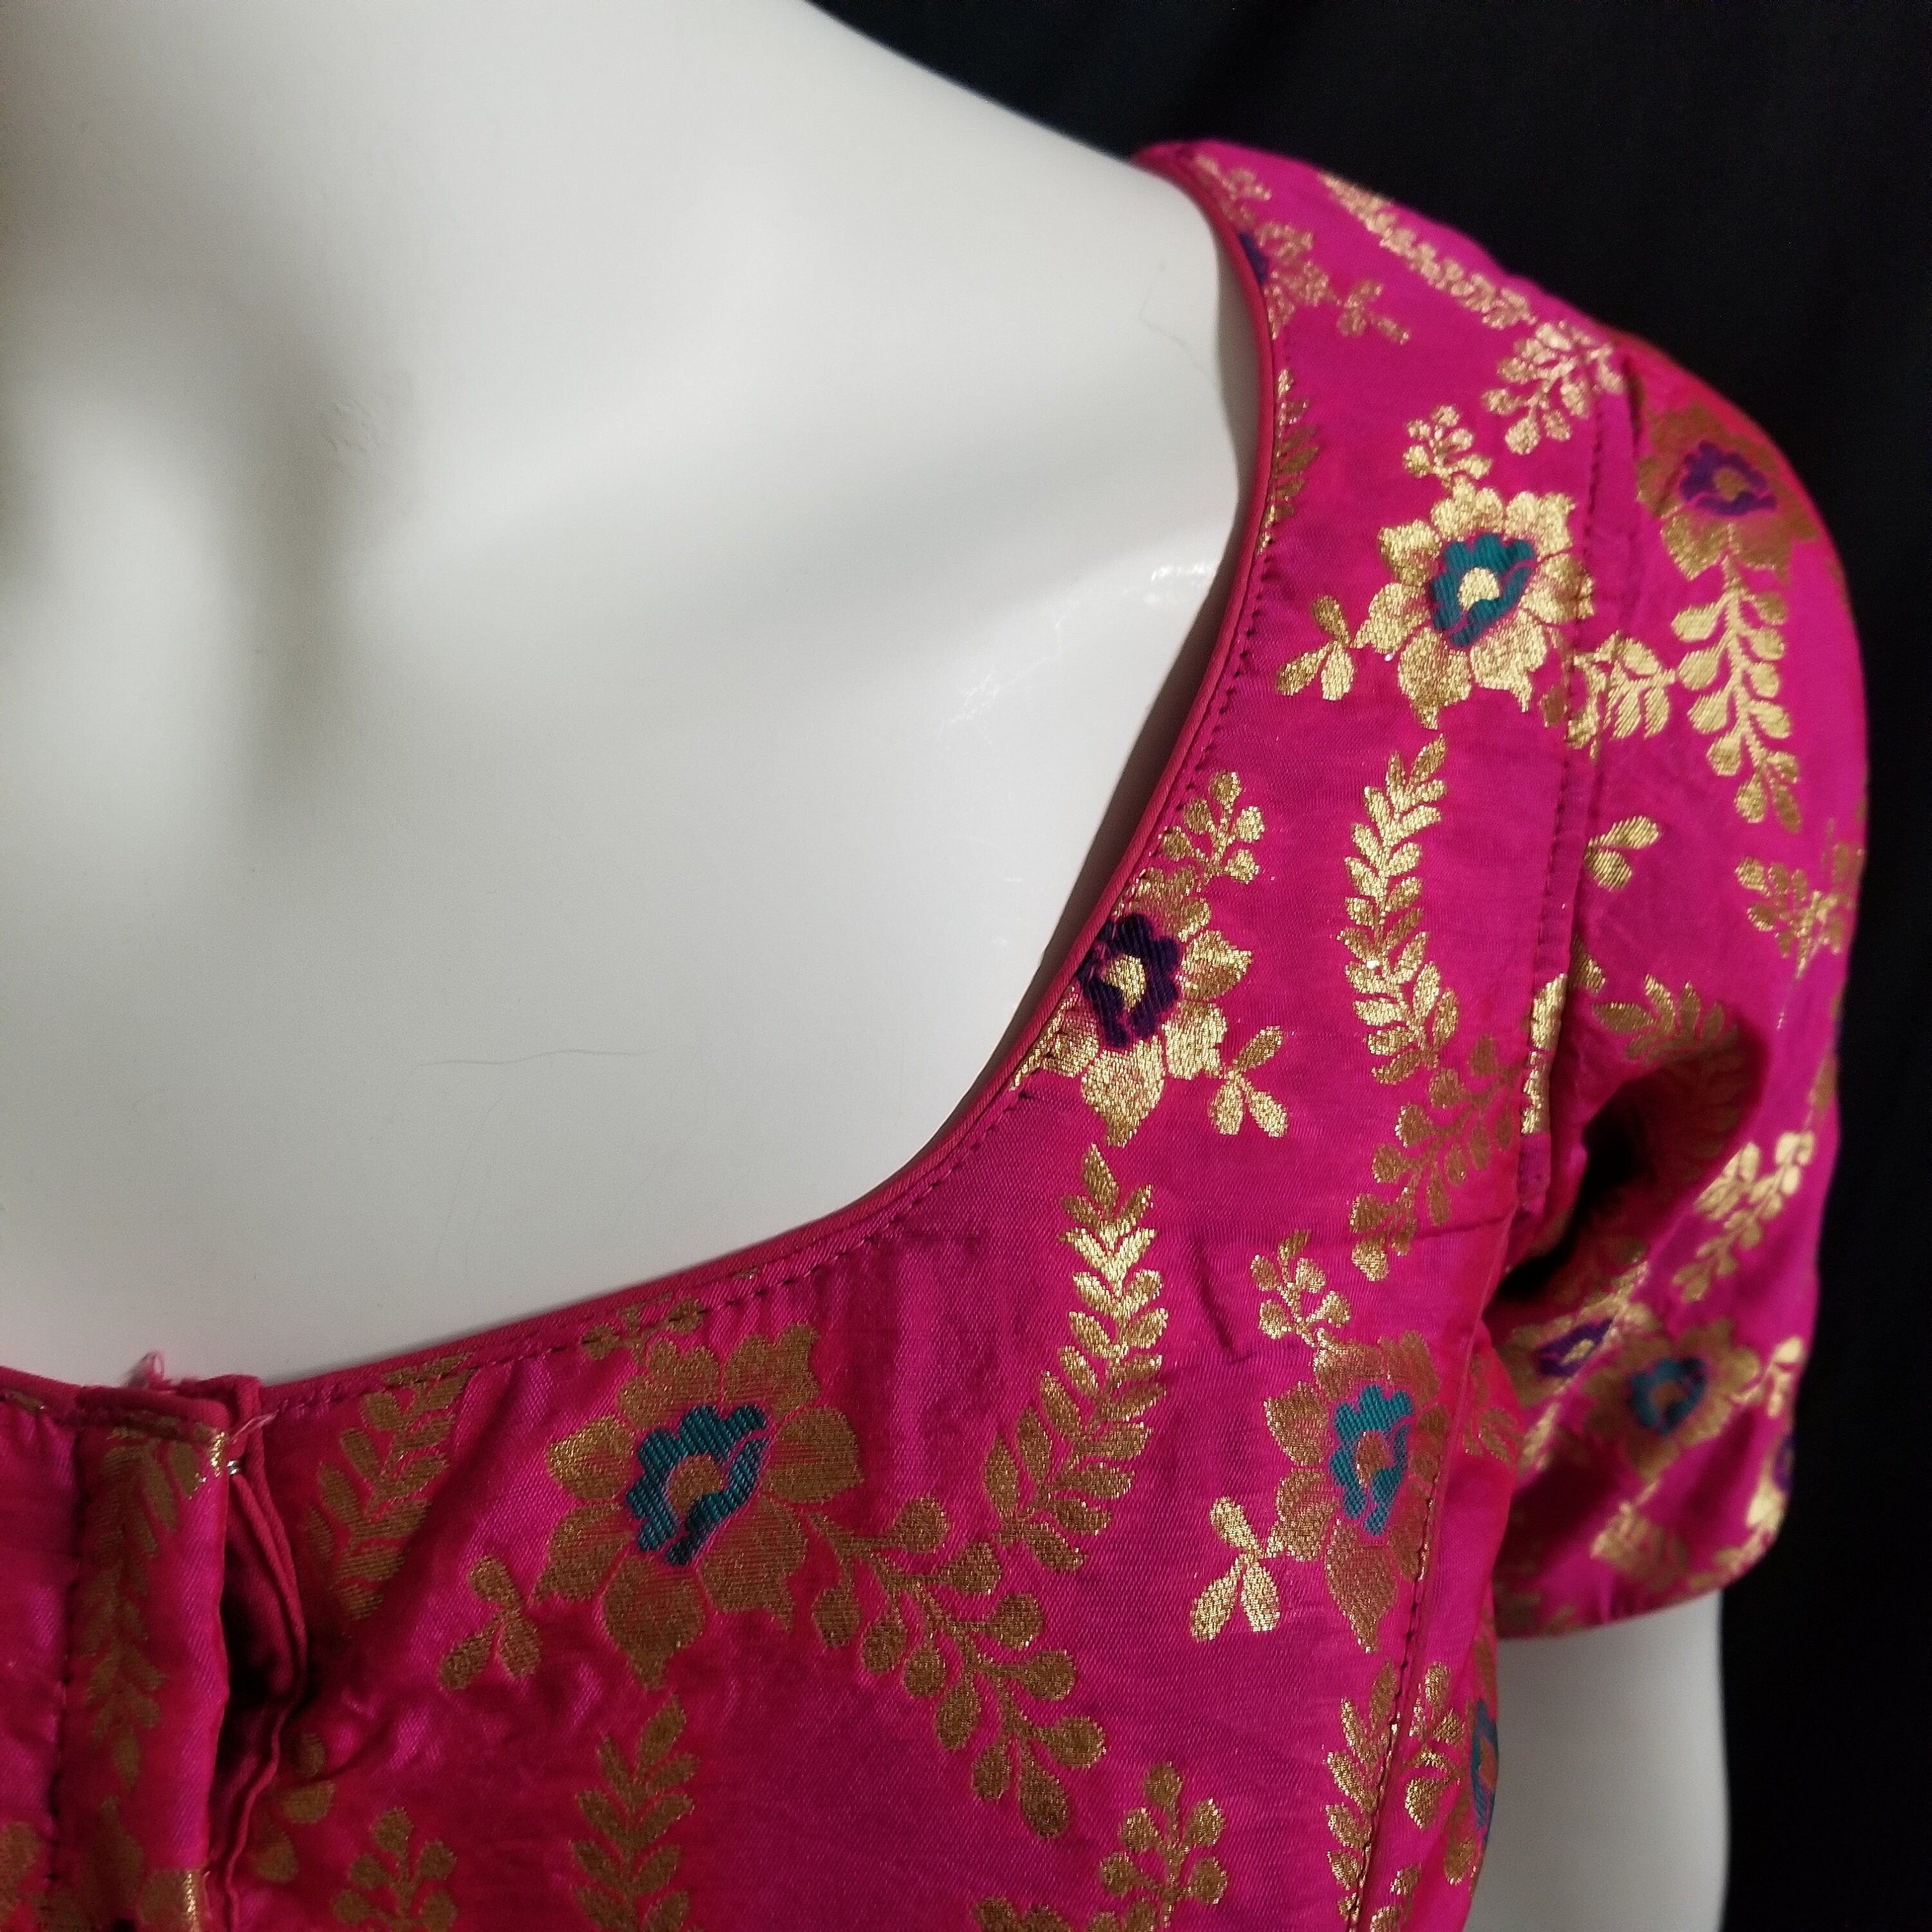 Readymade Saree Blouse - Pink with gold Silk Blouse with padded Blouse - size 36" (alter 34, 38)